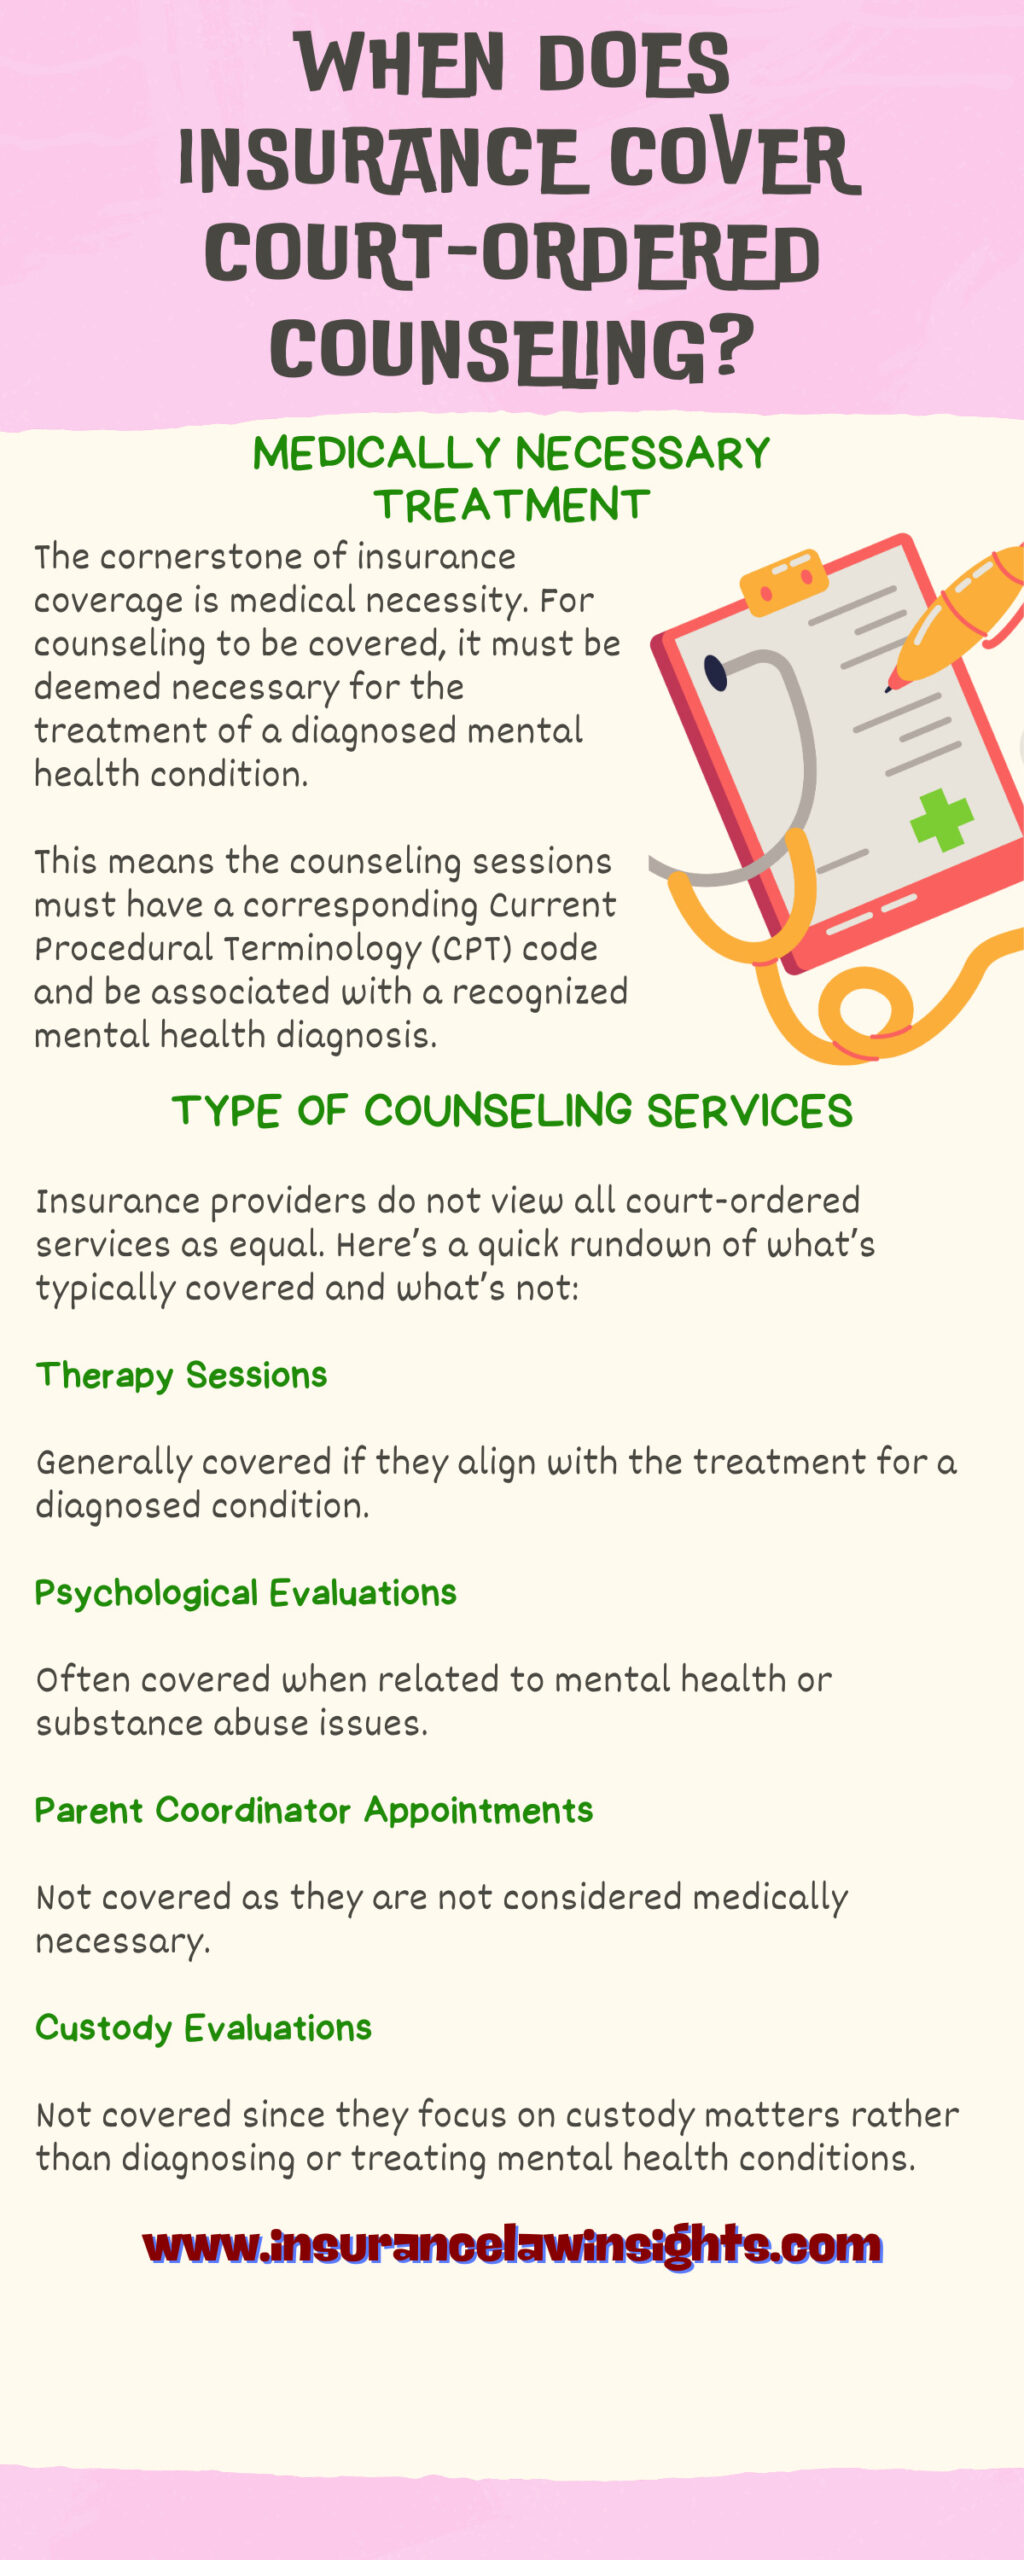 Court-Ordered Counseling Insurance